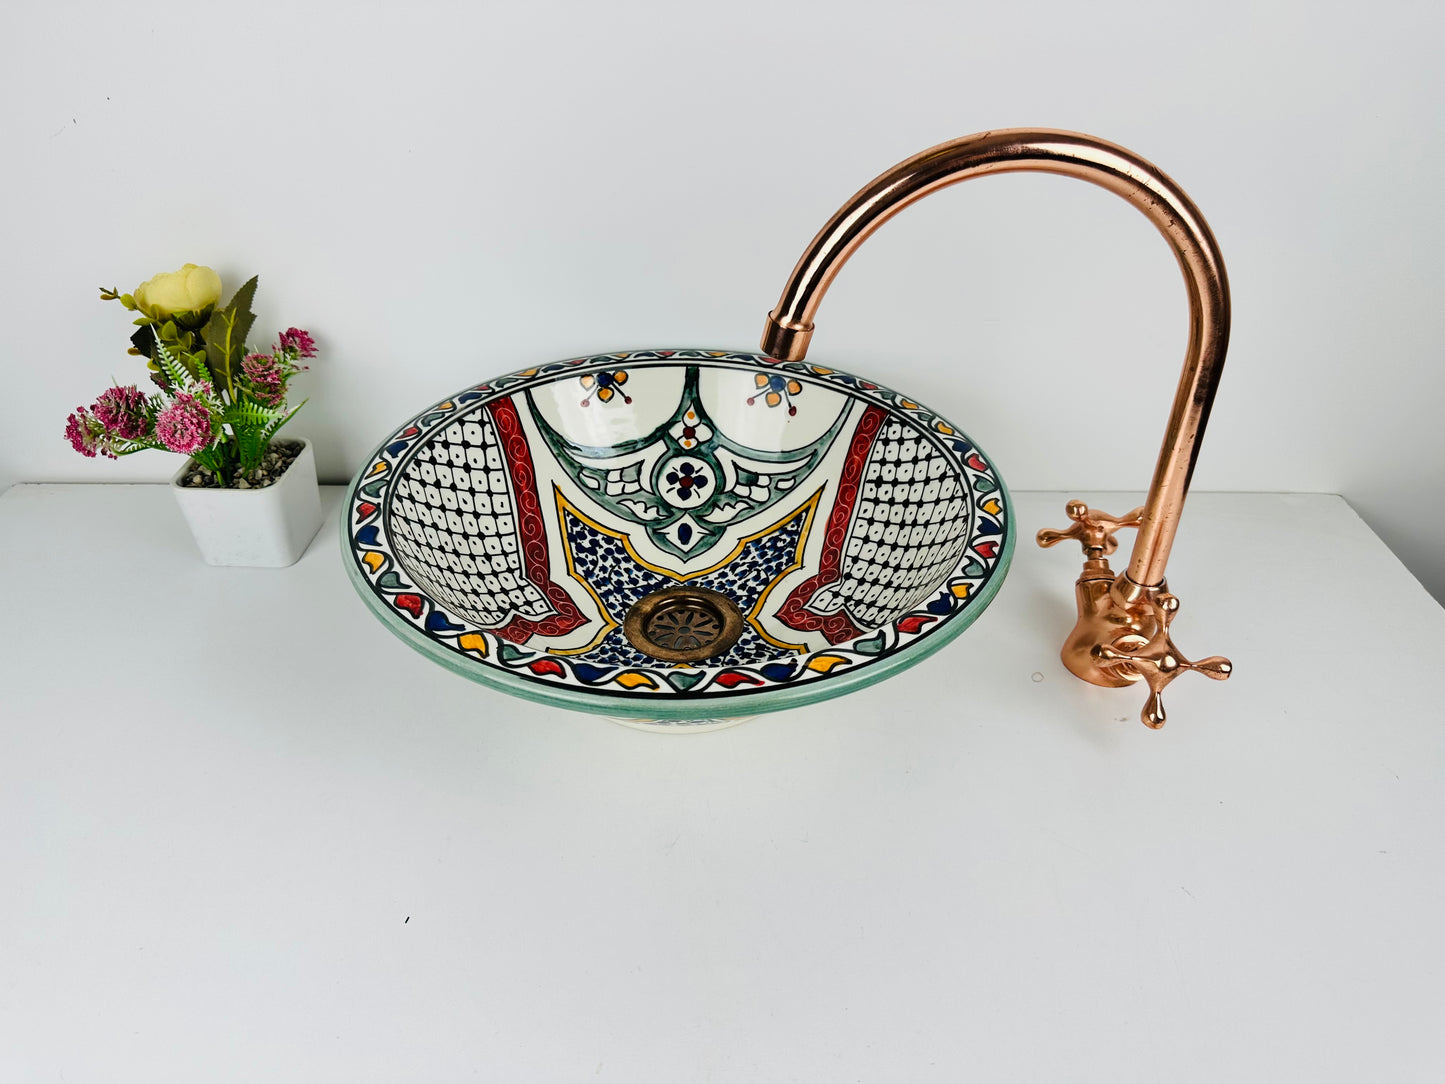 Traditional Oasis: Handcrafted Ceramic Sink with Exquisite Moroccan Design